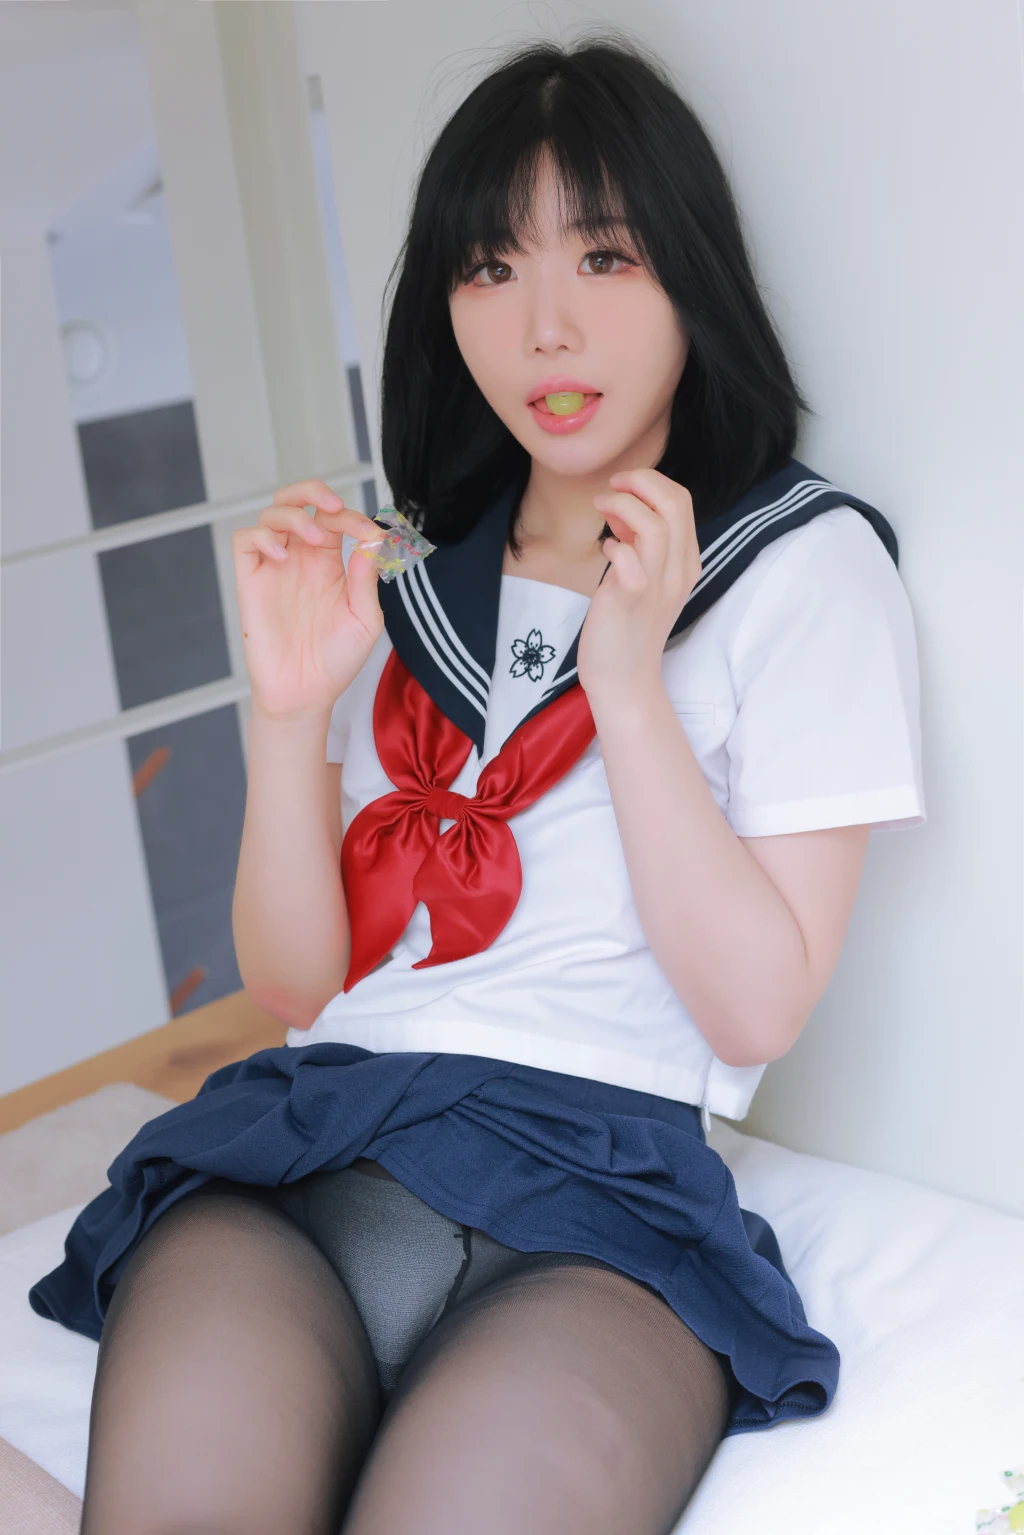 Patreon] Addielyn (에디린) – Morning Classes July (118 images + 2 videos)